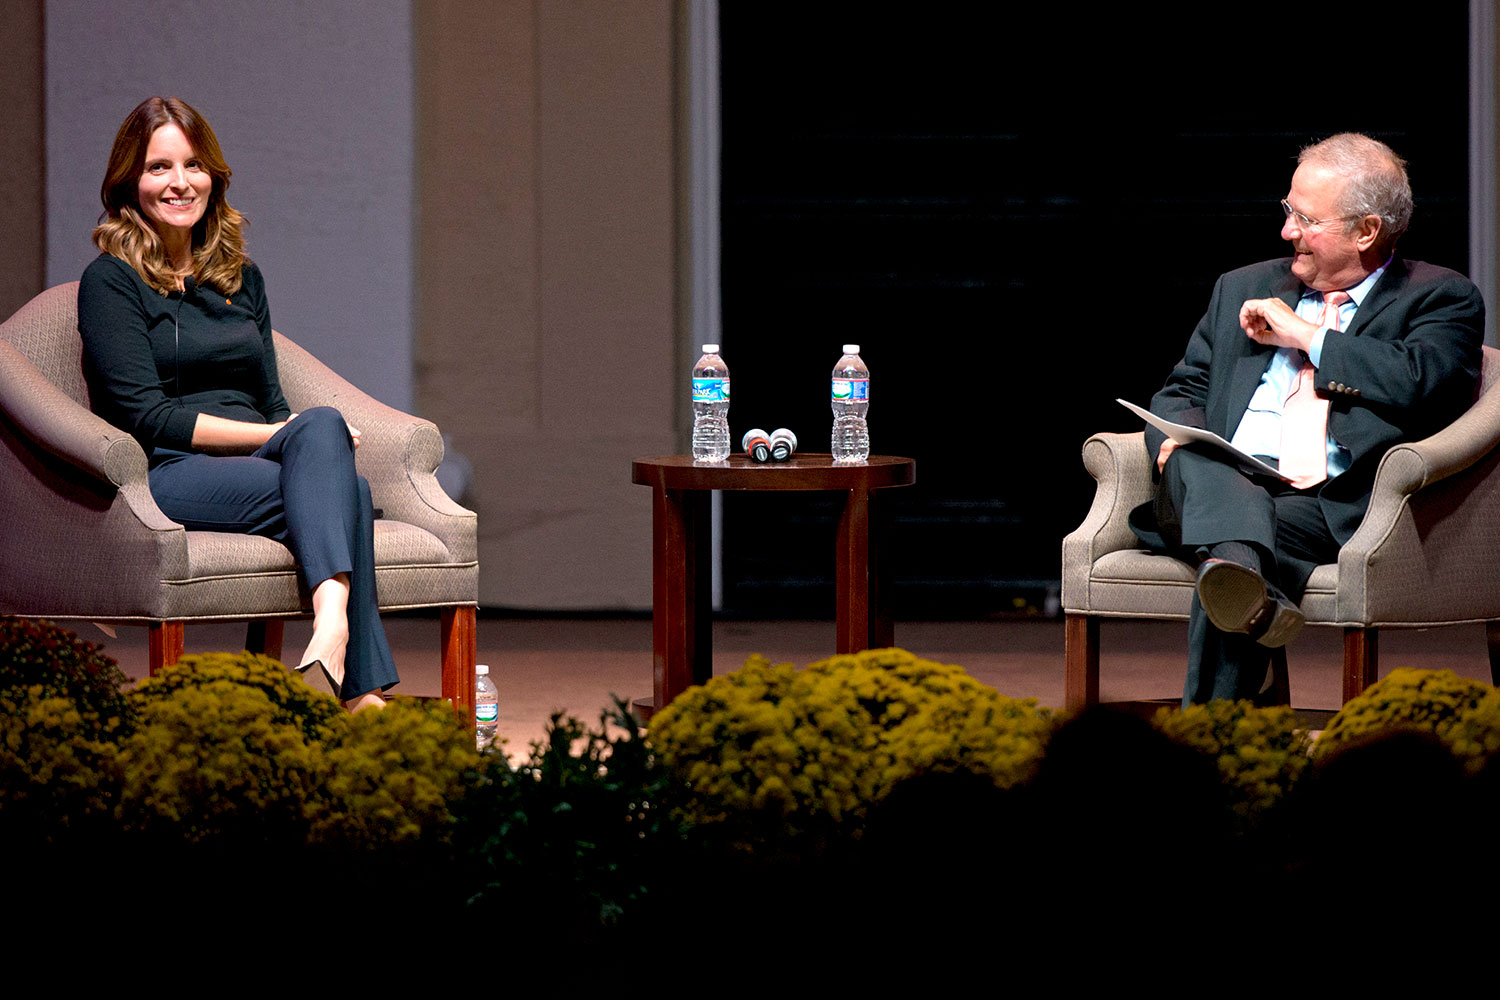 Fey and Chapel reunited when Fey came to speak at UVA for the 2013 President’s Speaker Series for the Arts.